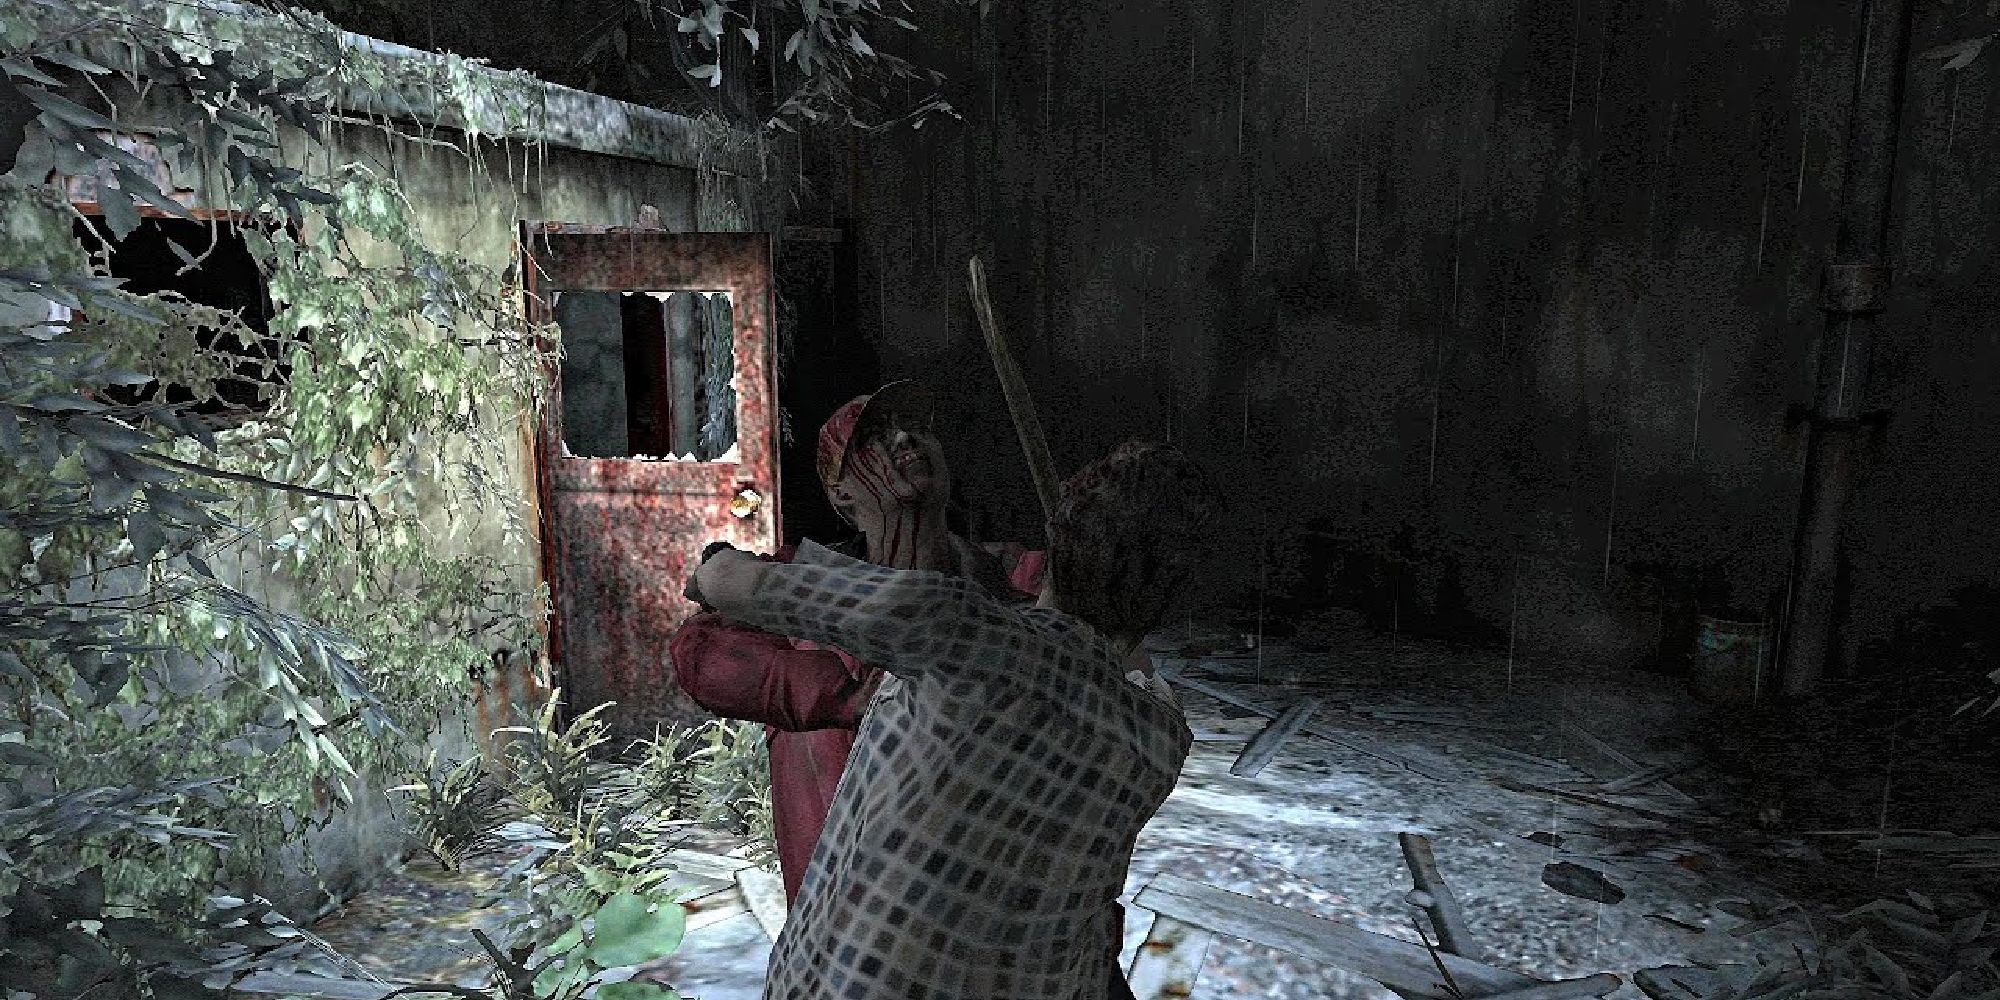 The player fights off one of the possessed villagers who tries to attack him with a weapon.